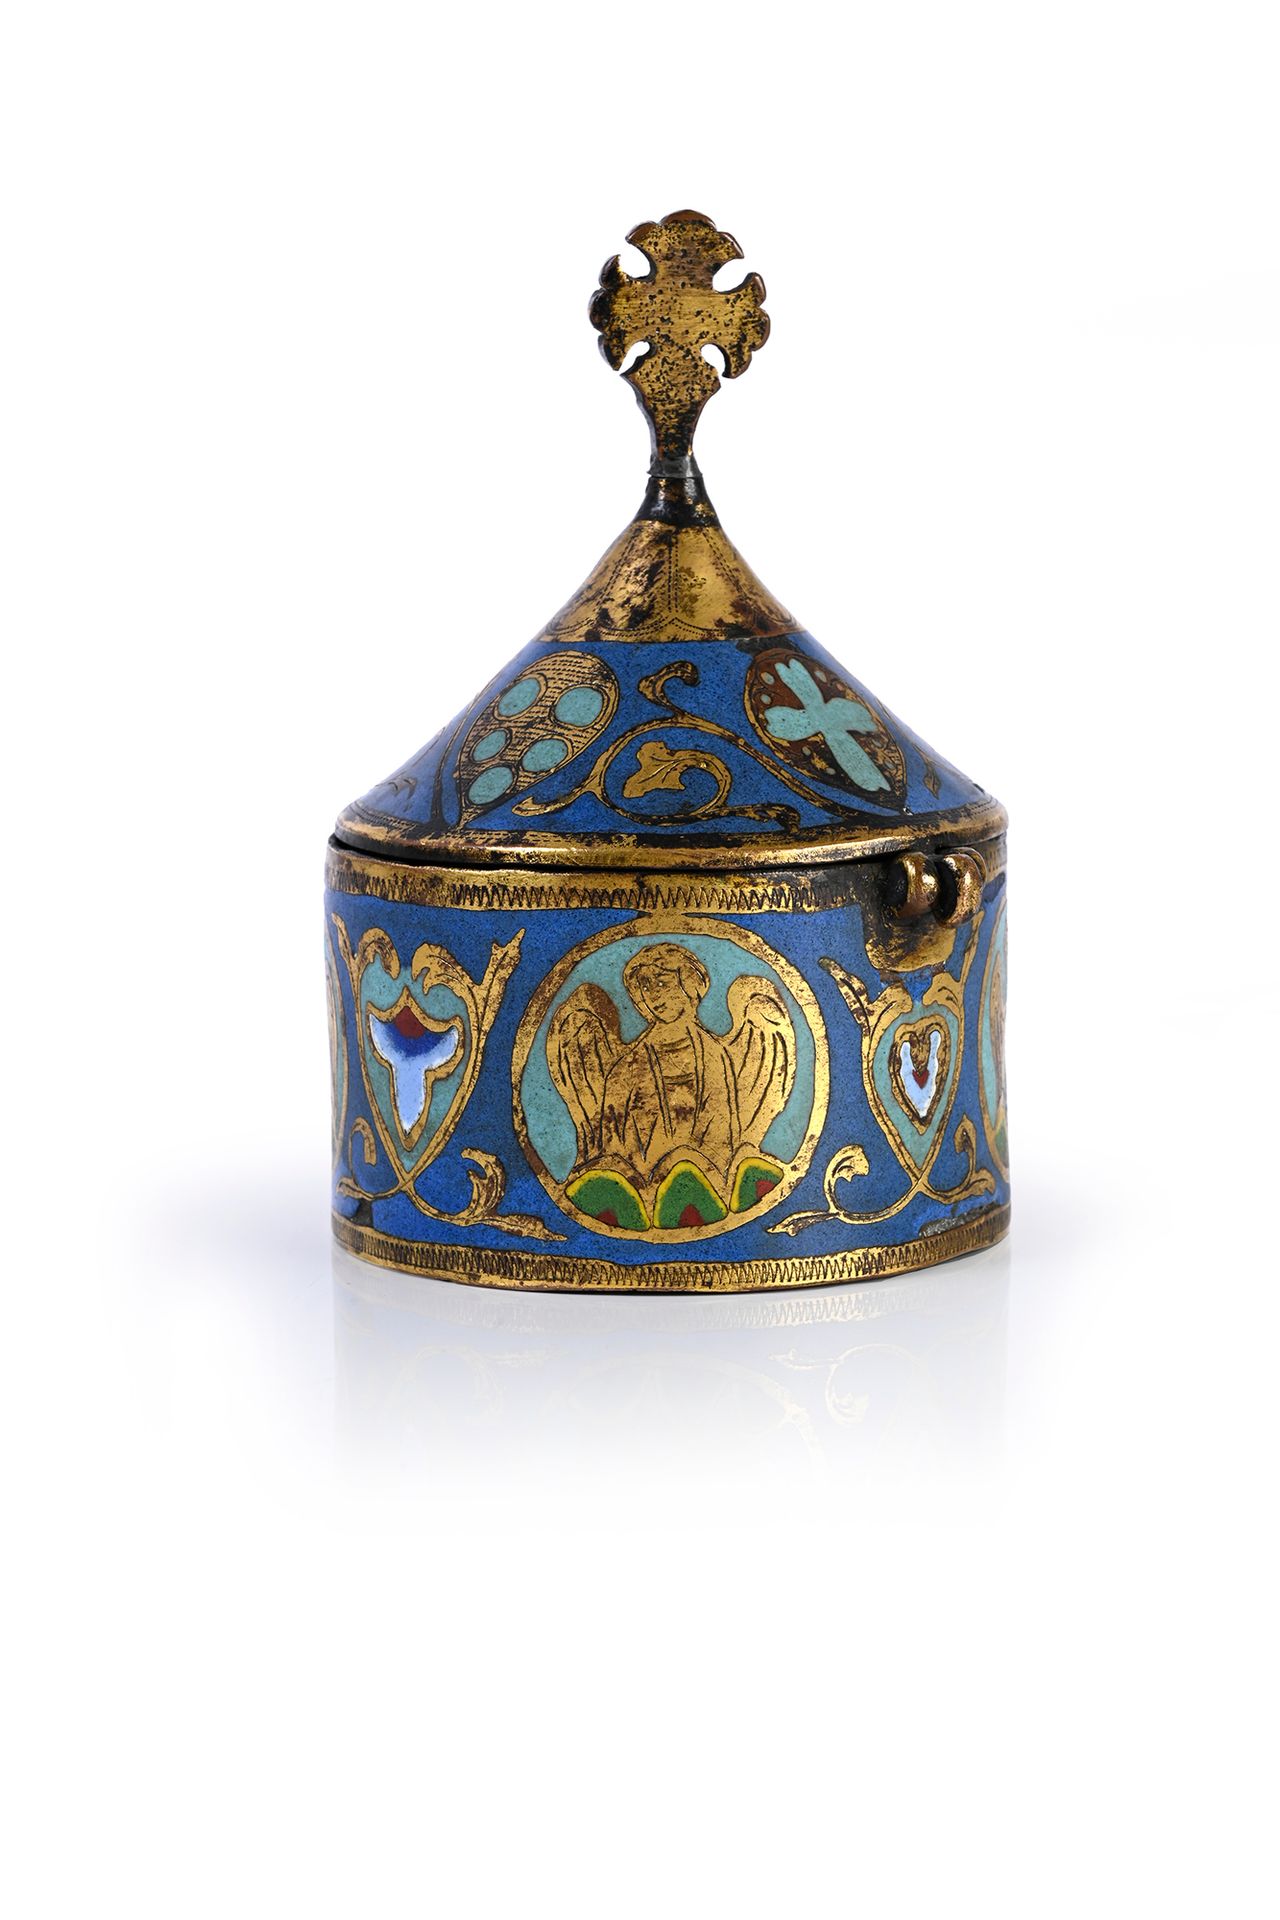 Null Pyxis in pressed copper, champlevé and enamelled, engraved and gilded, enam&hellip;